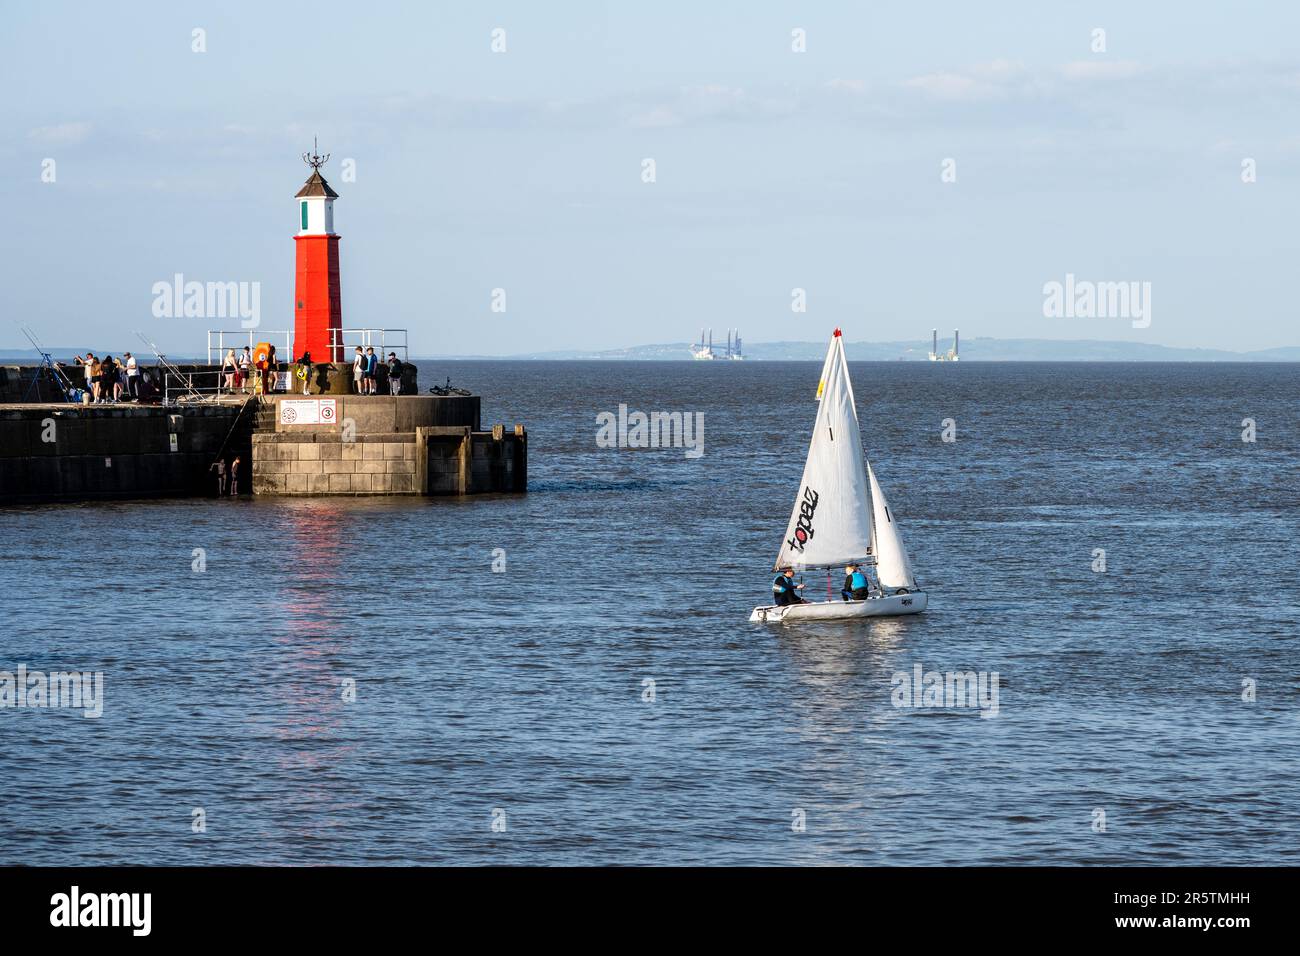 People enjoy sailing, fishing and swimming on a sunny day in Watchet Harbour, West Somerset. Stock Photo